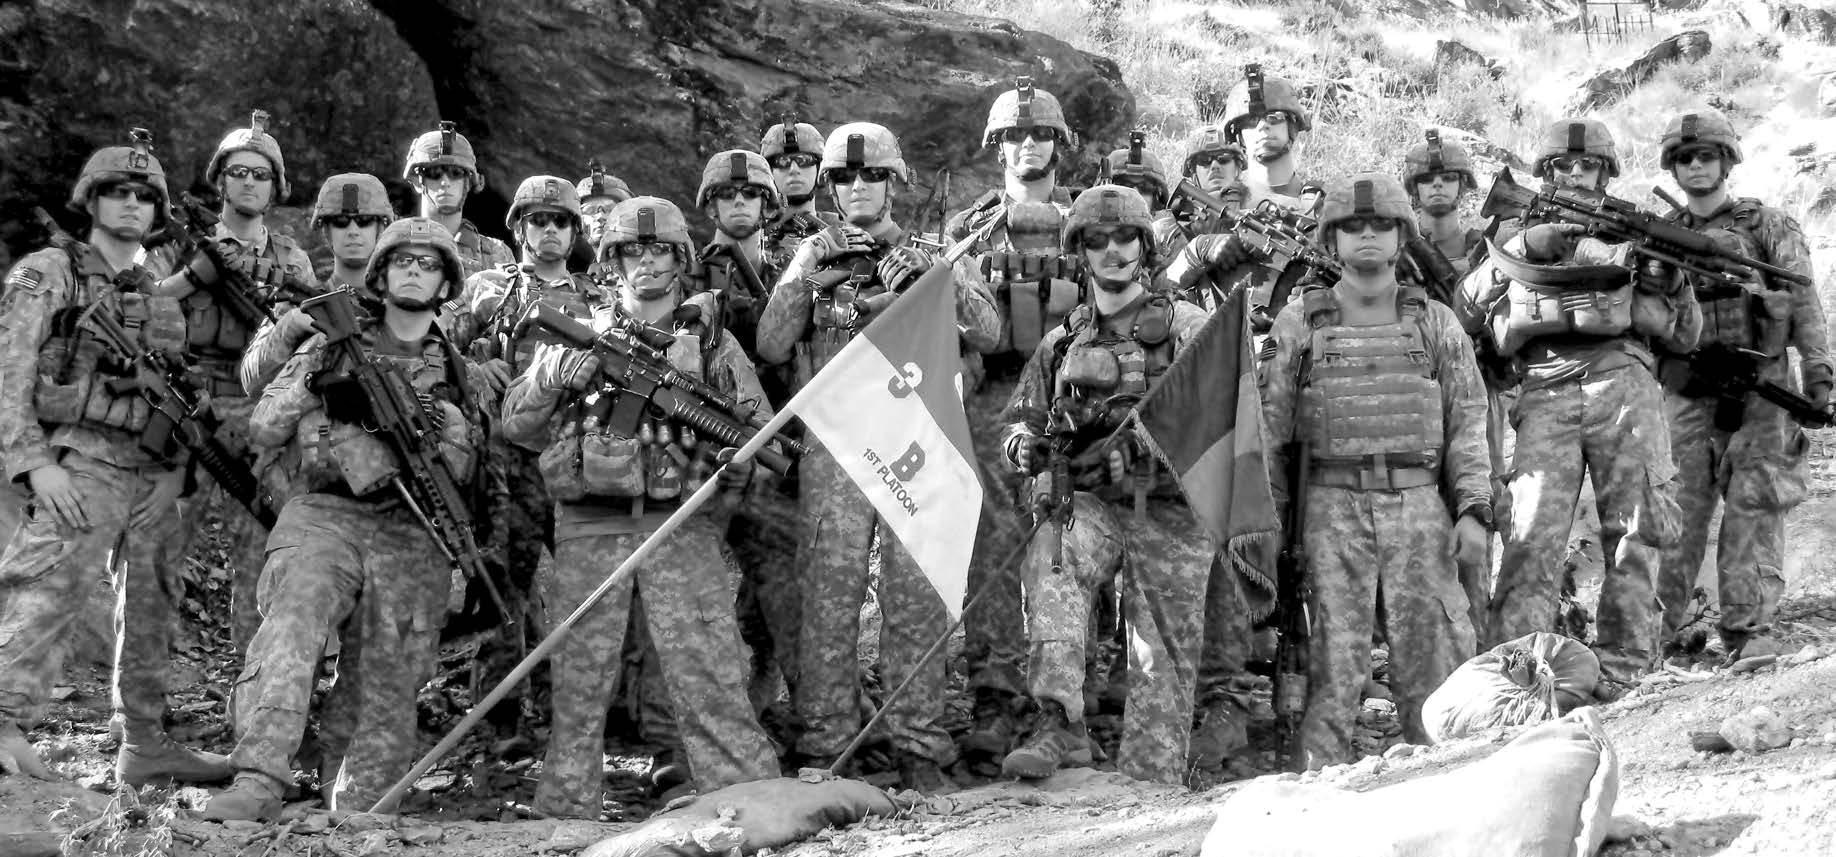 Members of Red Platoon, 3-61 Cavalry Regiment, including Staff Sergeant Clint Romesha (front row, second from right) pose for a picture in 2009 shortly after arriving at Combat Outpost Keating in Nuristan Province, Afghanistan. Courtesy of DoD.